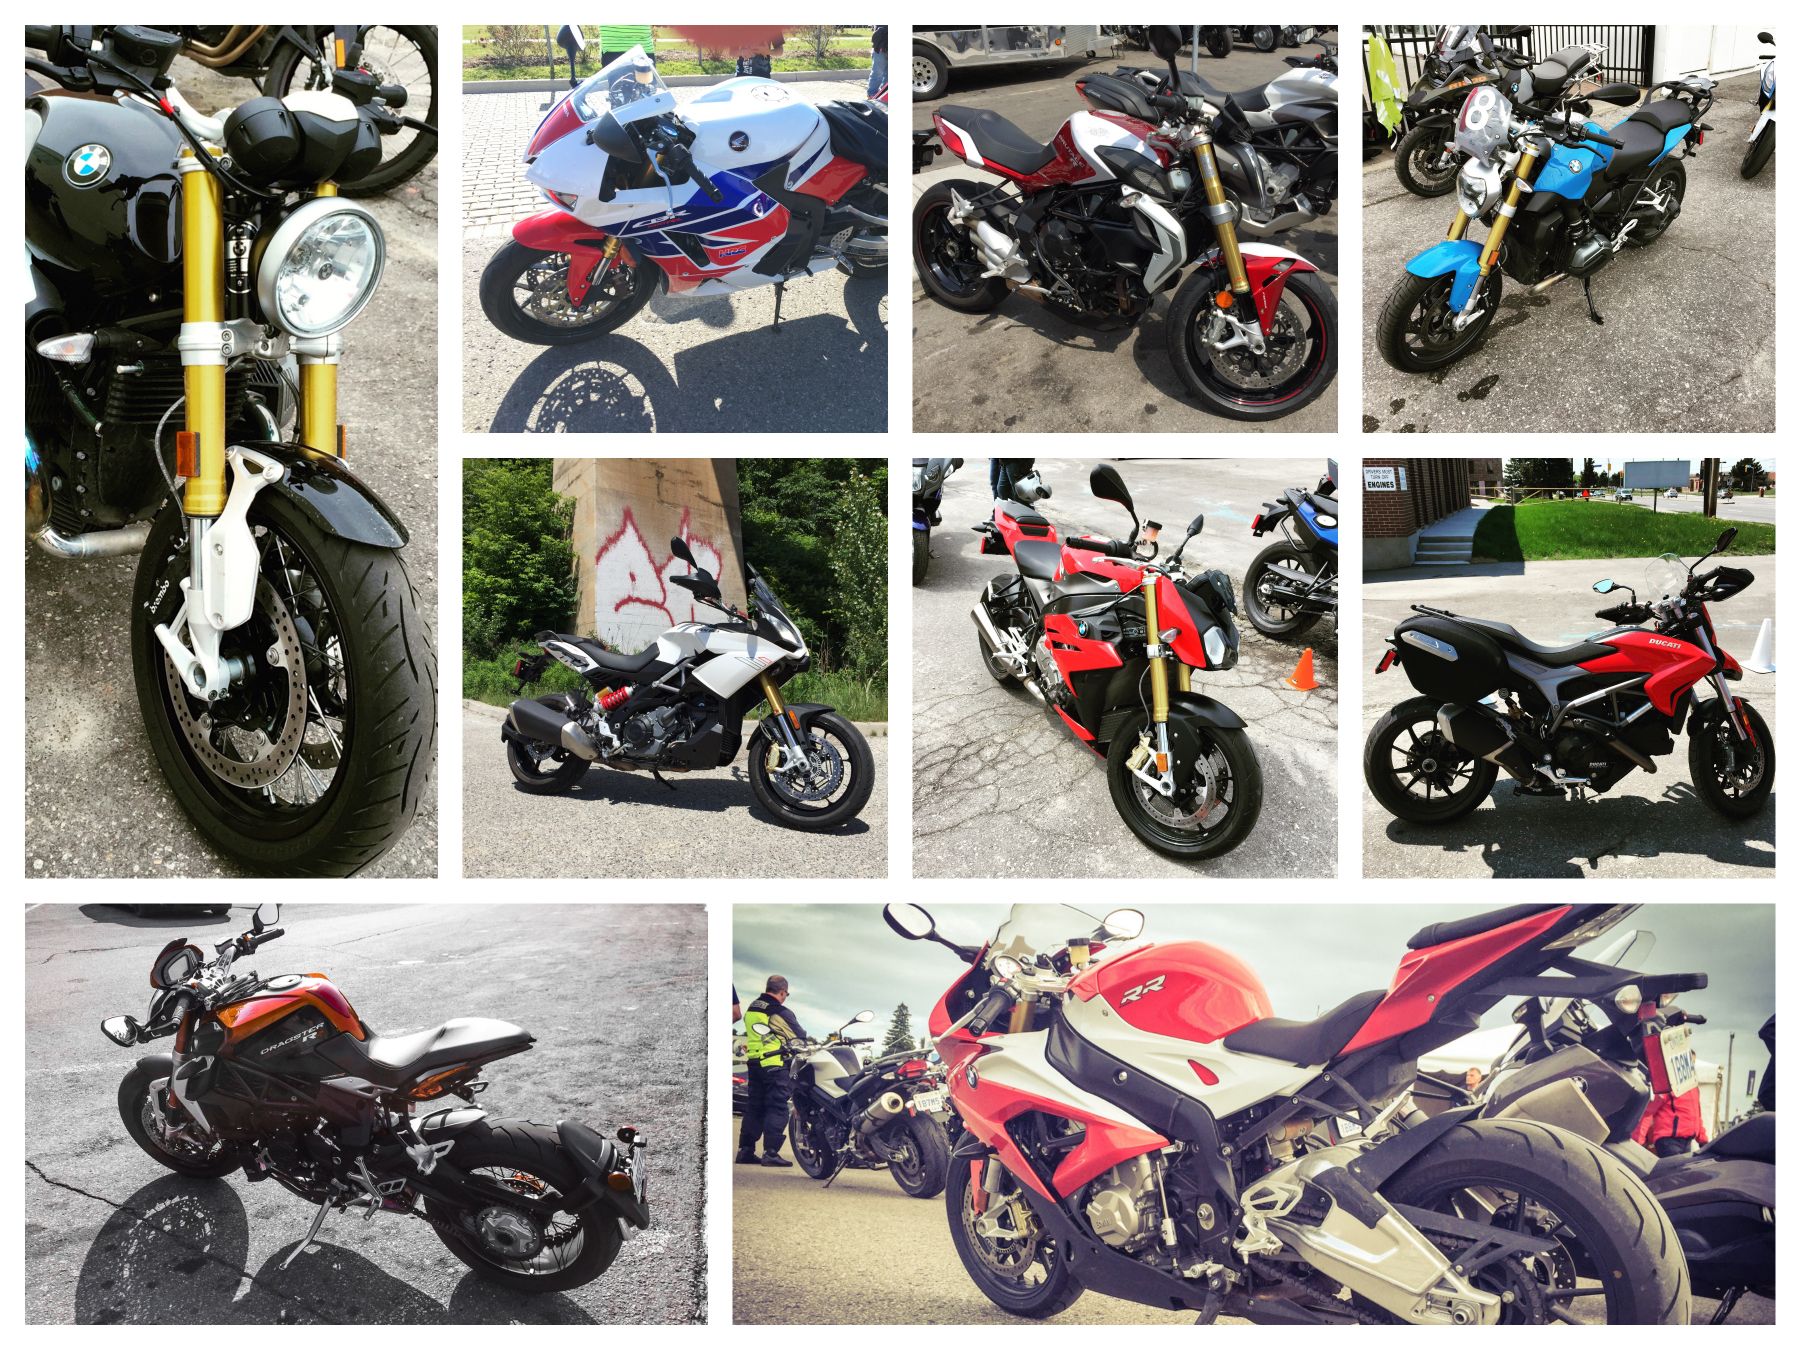 These are a few of the 24 bikes I have tried out over the past three months.